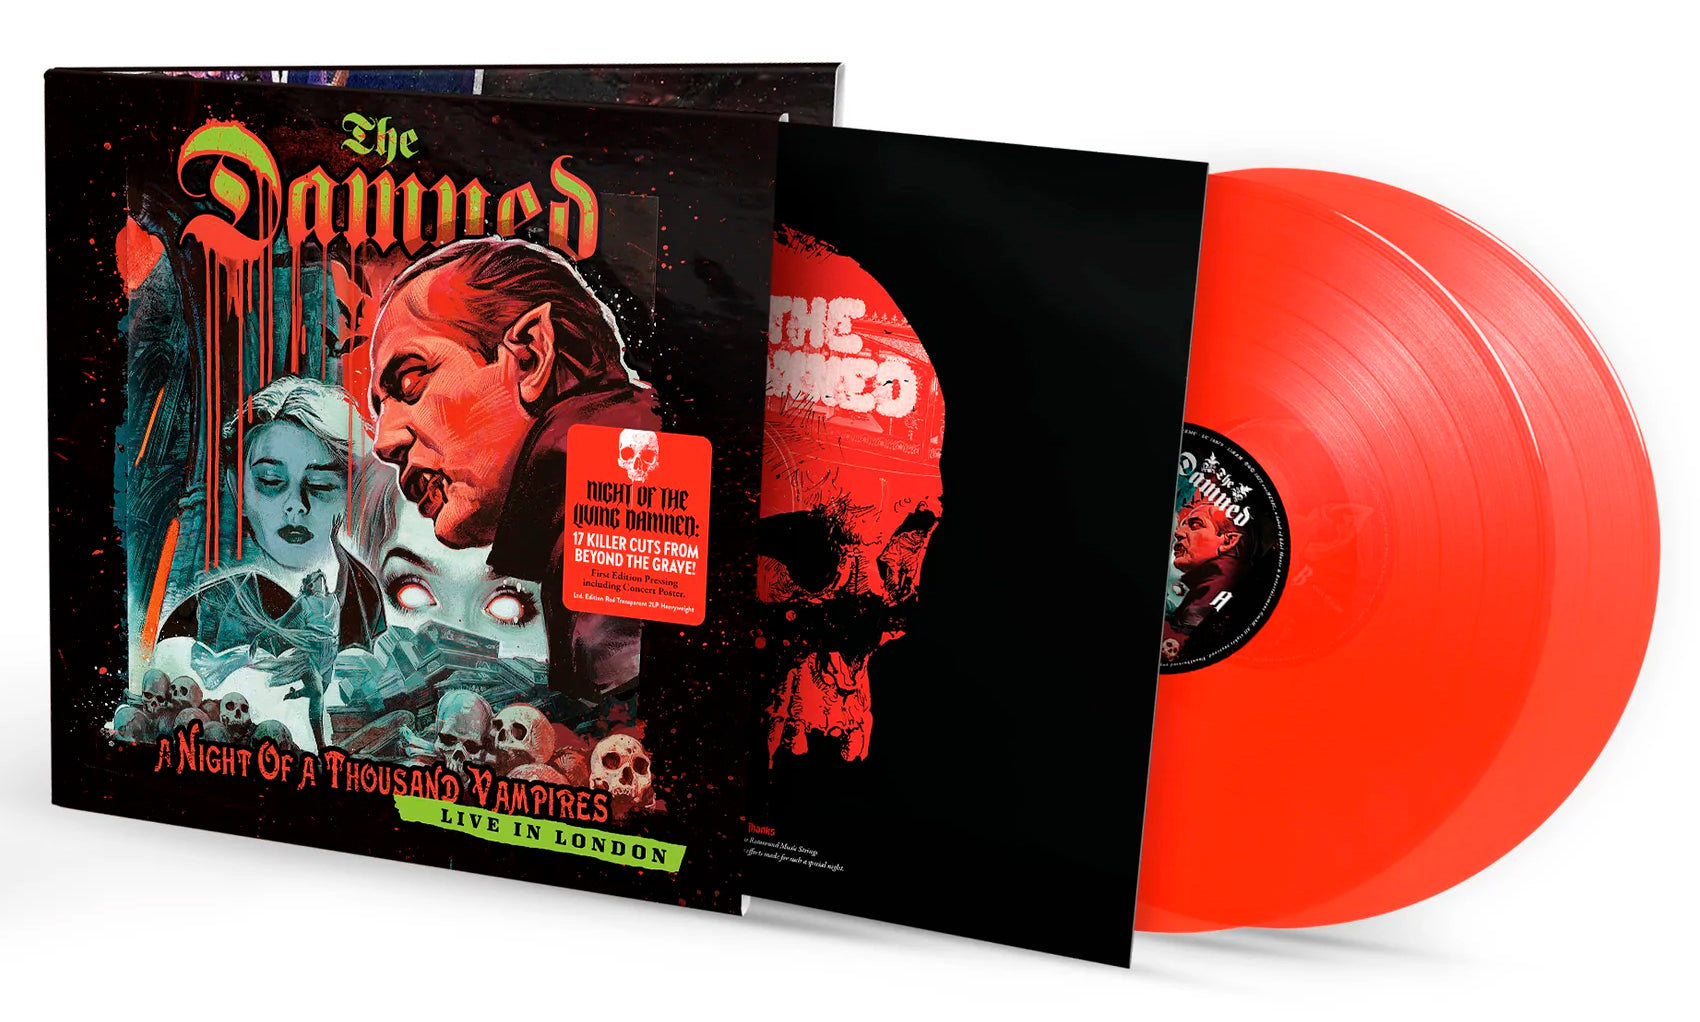 The Damned A Night of A Thousand Vampires Red Vinyl LP